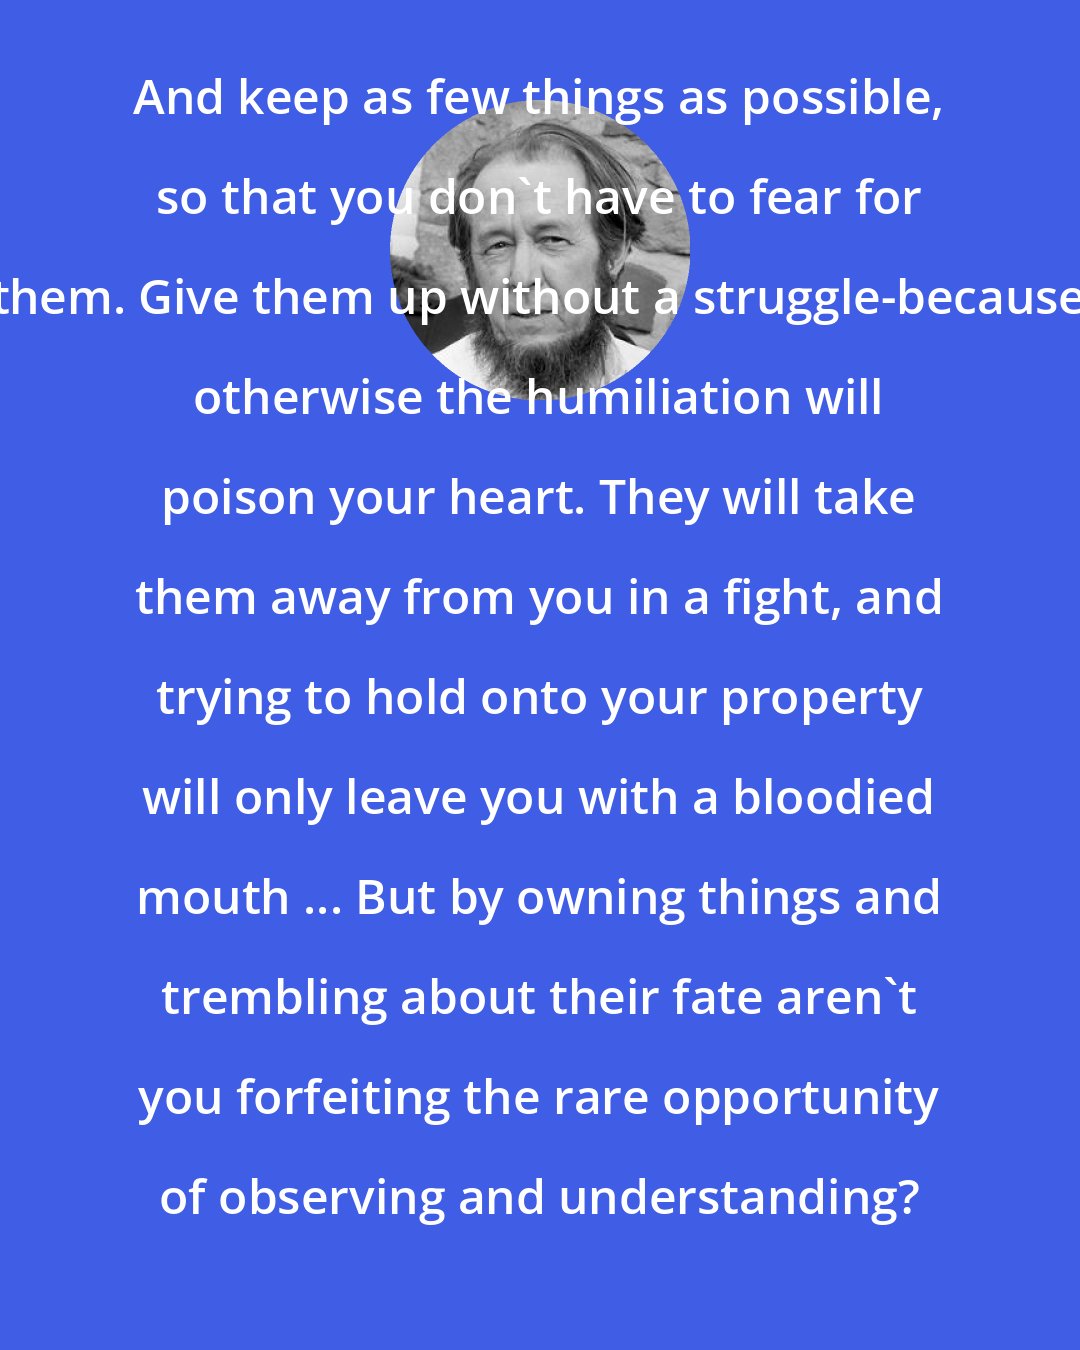 Aleksandr Solzhenitsyn: And keep as few things as possible, so that you don't have to fear for them. Give them up without a struggle-because otherwise the humiliation will poison your heart. They will take them away from you in a fight, and trying to hold onto your property will only leave you with a bloodied mouth ... But by owning things and trembling about their fate aren't you forfeiting the rare opportunity of observing and understanding?